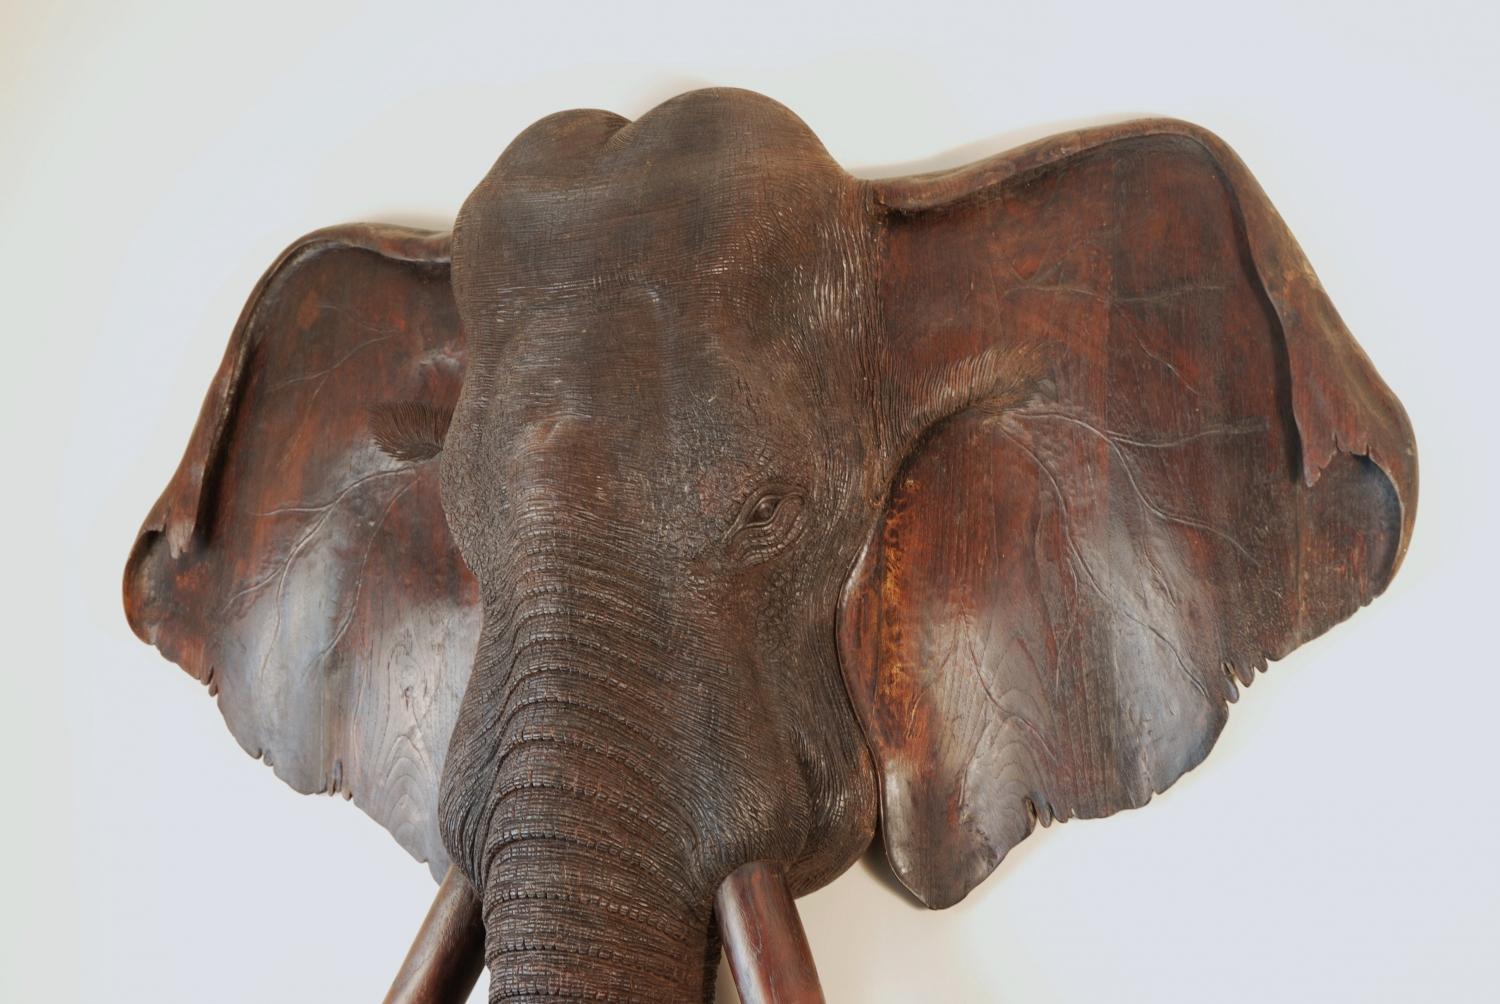 Large 19thc carved wooden elephant head